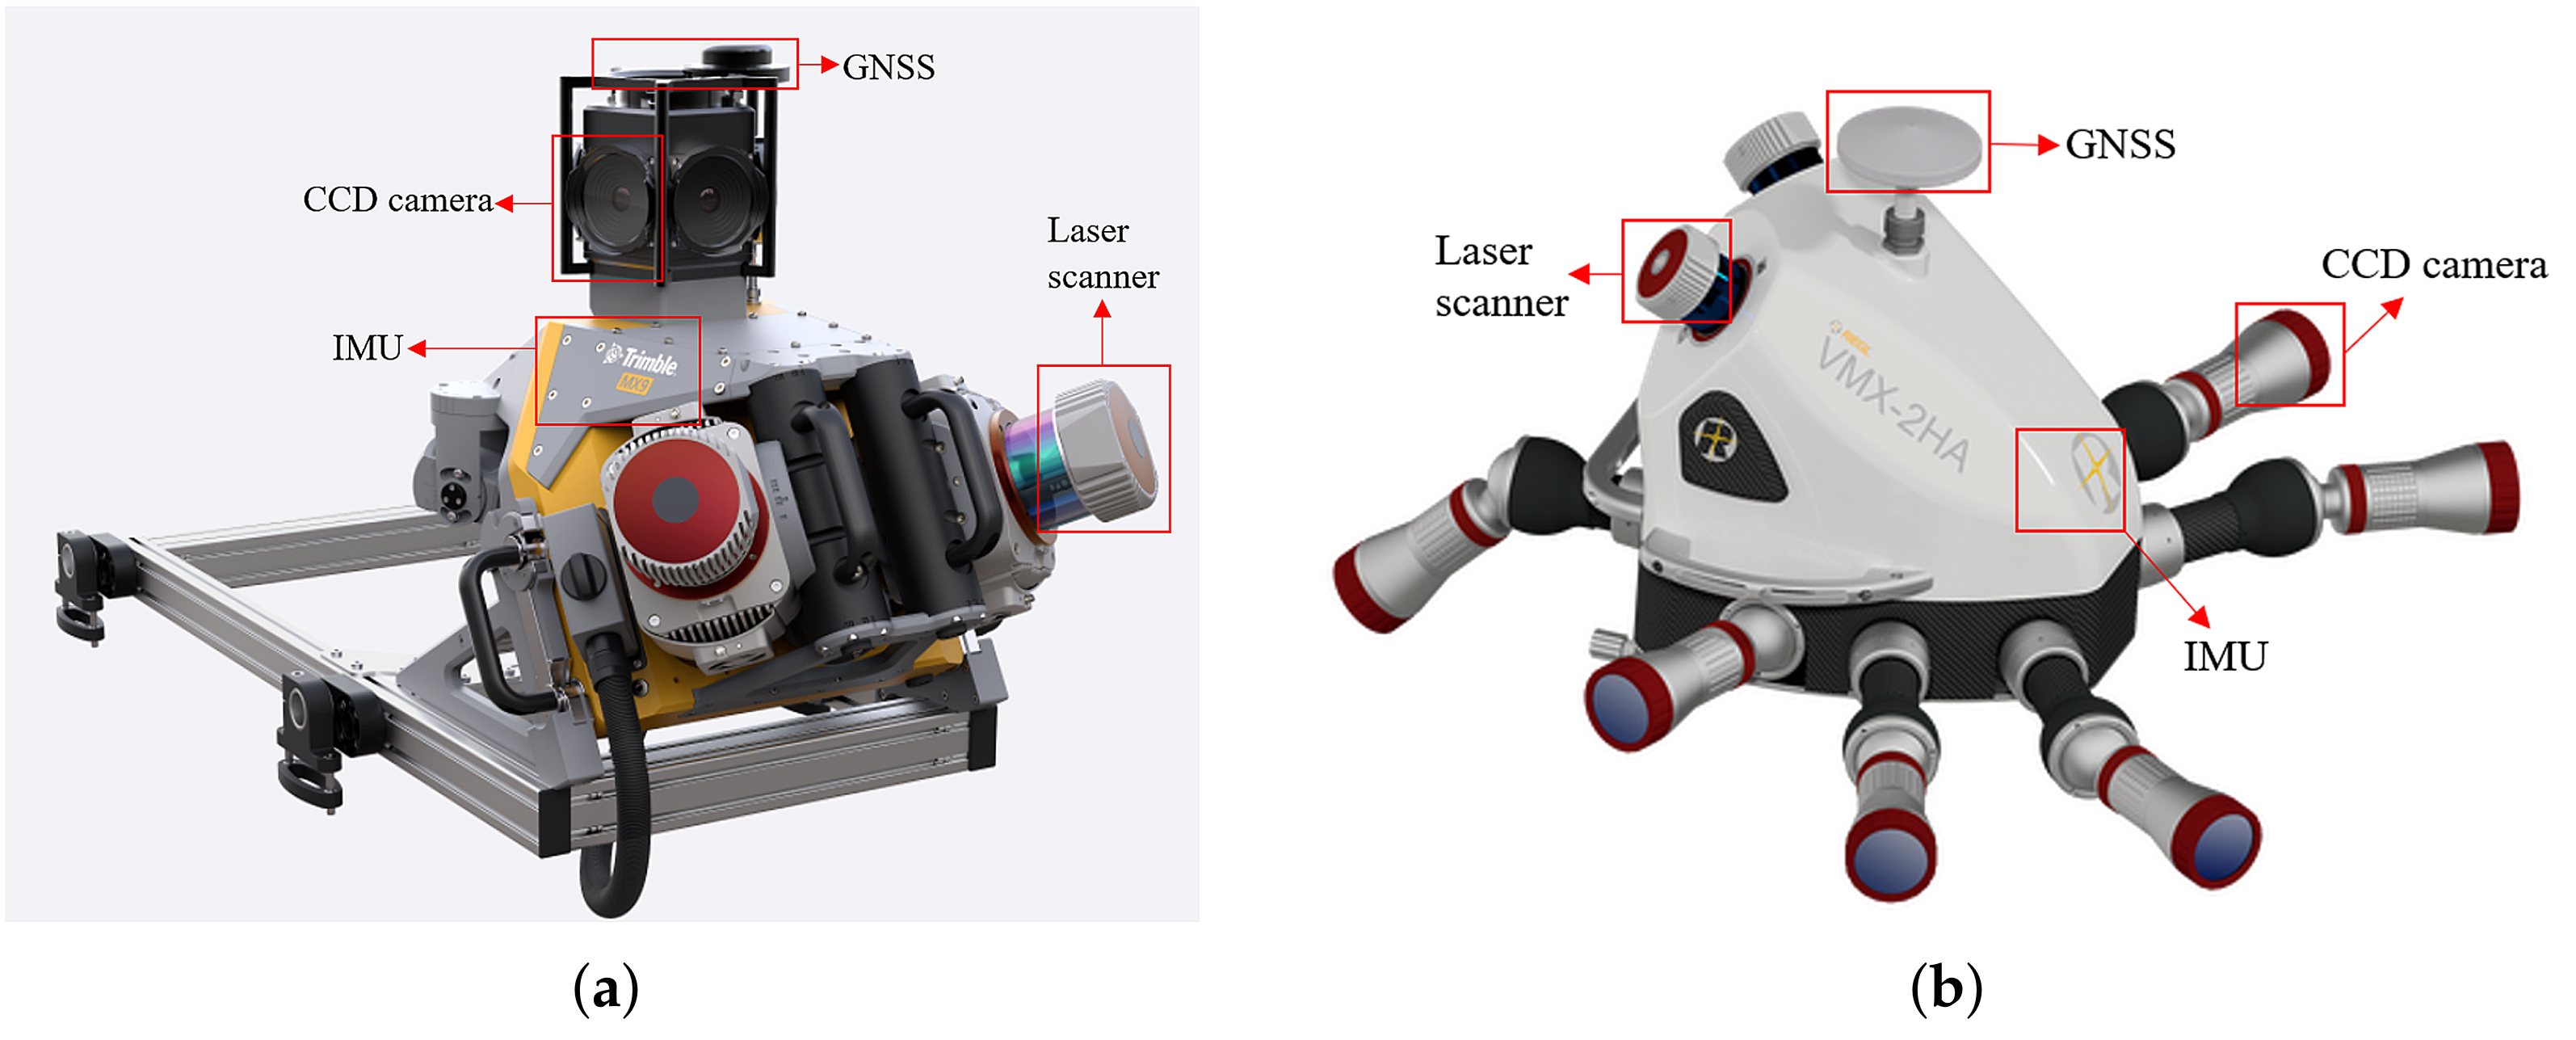 Remote Sensing | Free Full-Text | Mobile Laser Scanned Point-Clouds for  Road Object Detection and Extraction: A Review